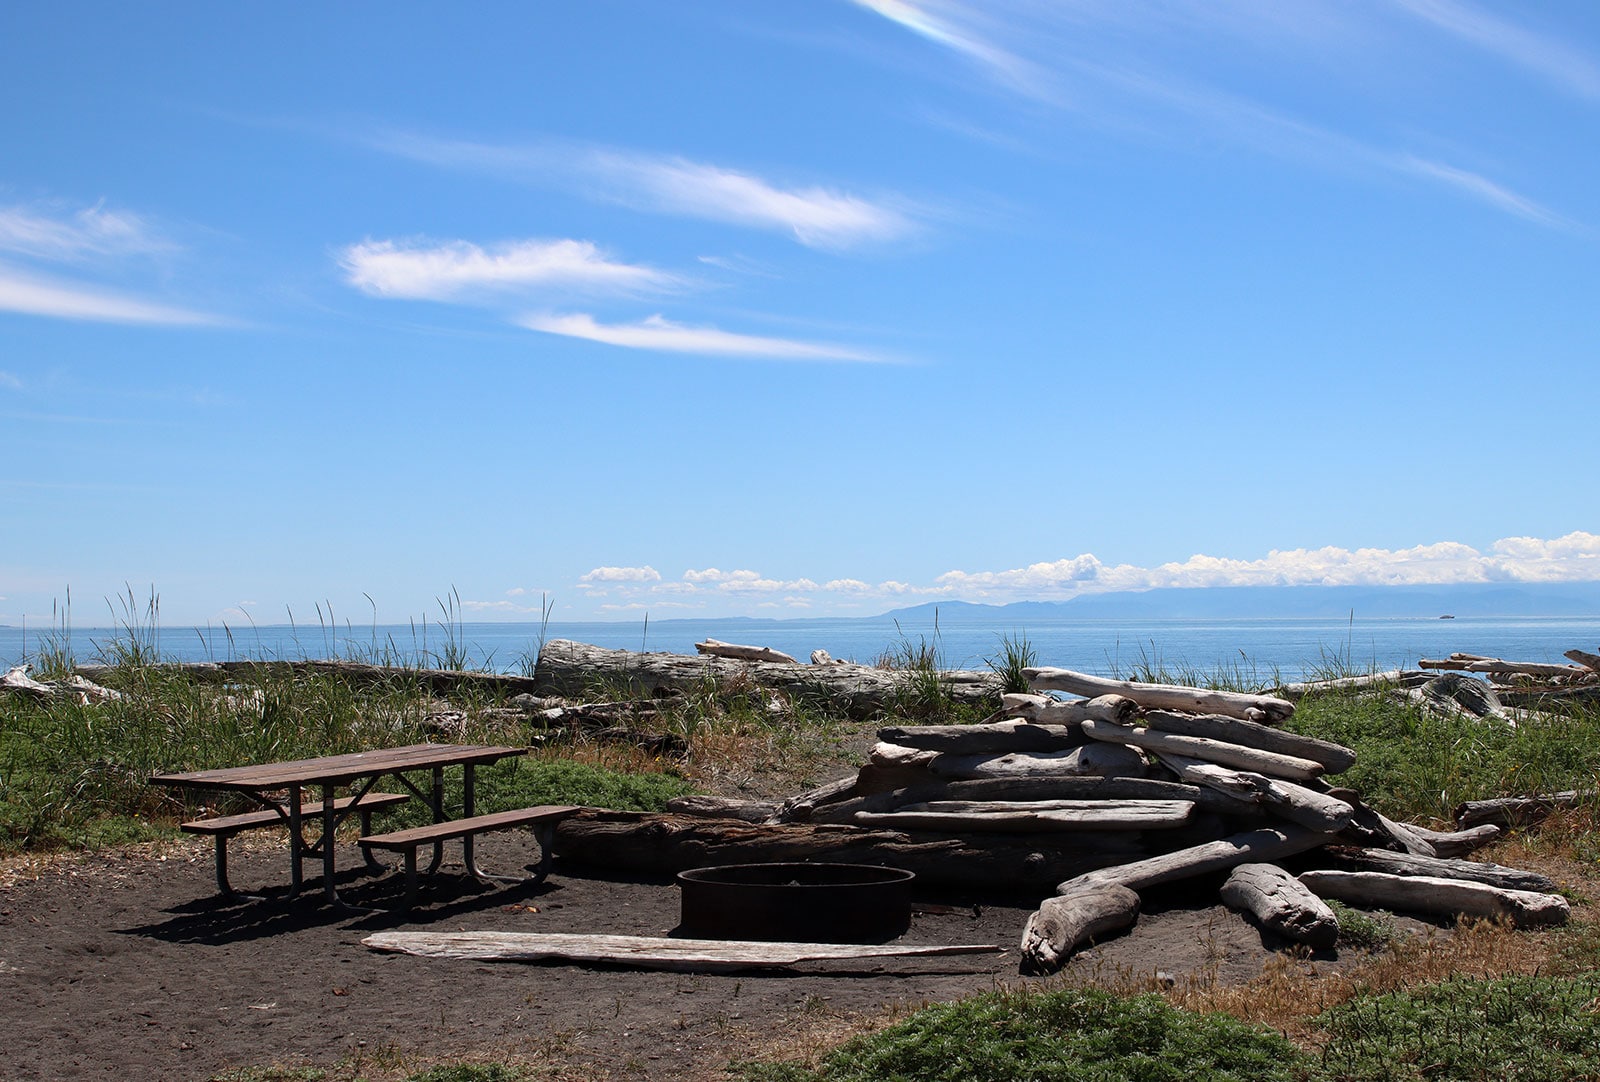 Fire pit and picnic table surrounded by drift wood